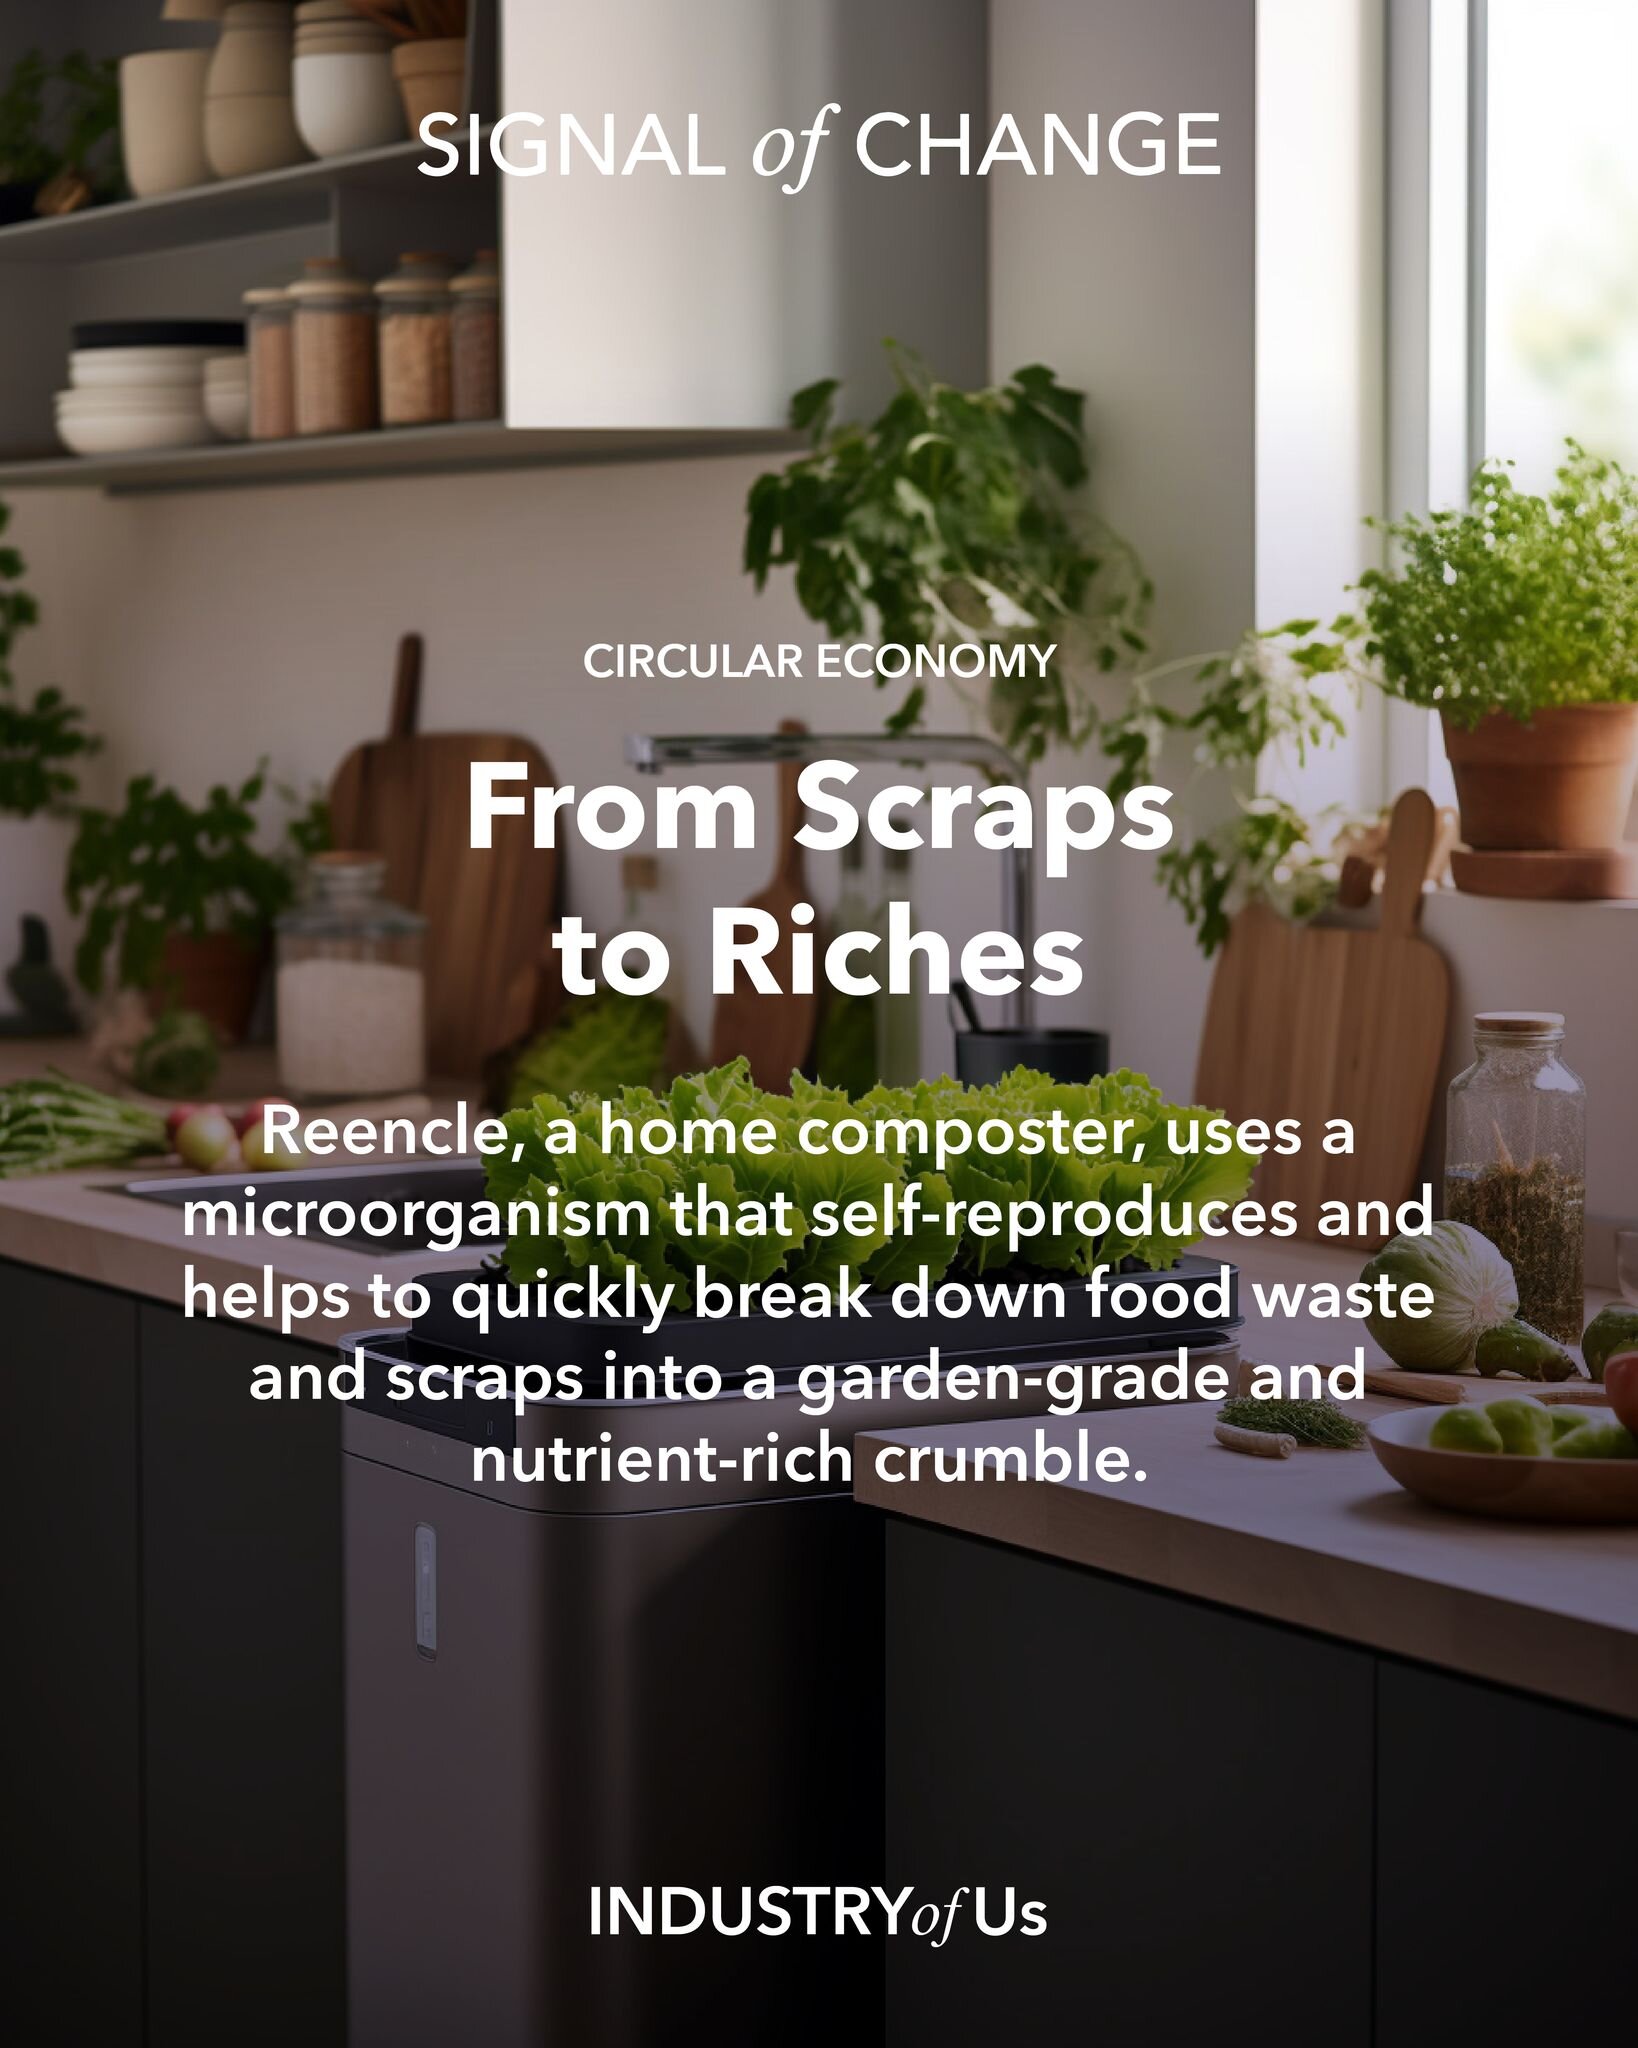 Reencle is a home composter that is set to disrupt and upscale home composting with it&rsquo;s trademarked microorganism that self-reproduces and helps to quickly break down food waste and scraps.

Unlike others on the market that simply dehydrate fo